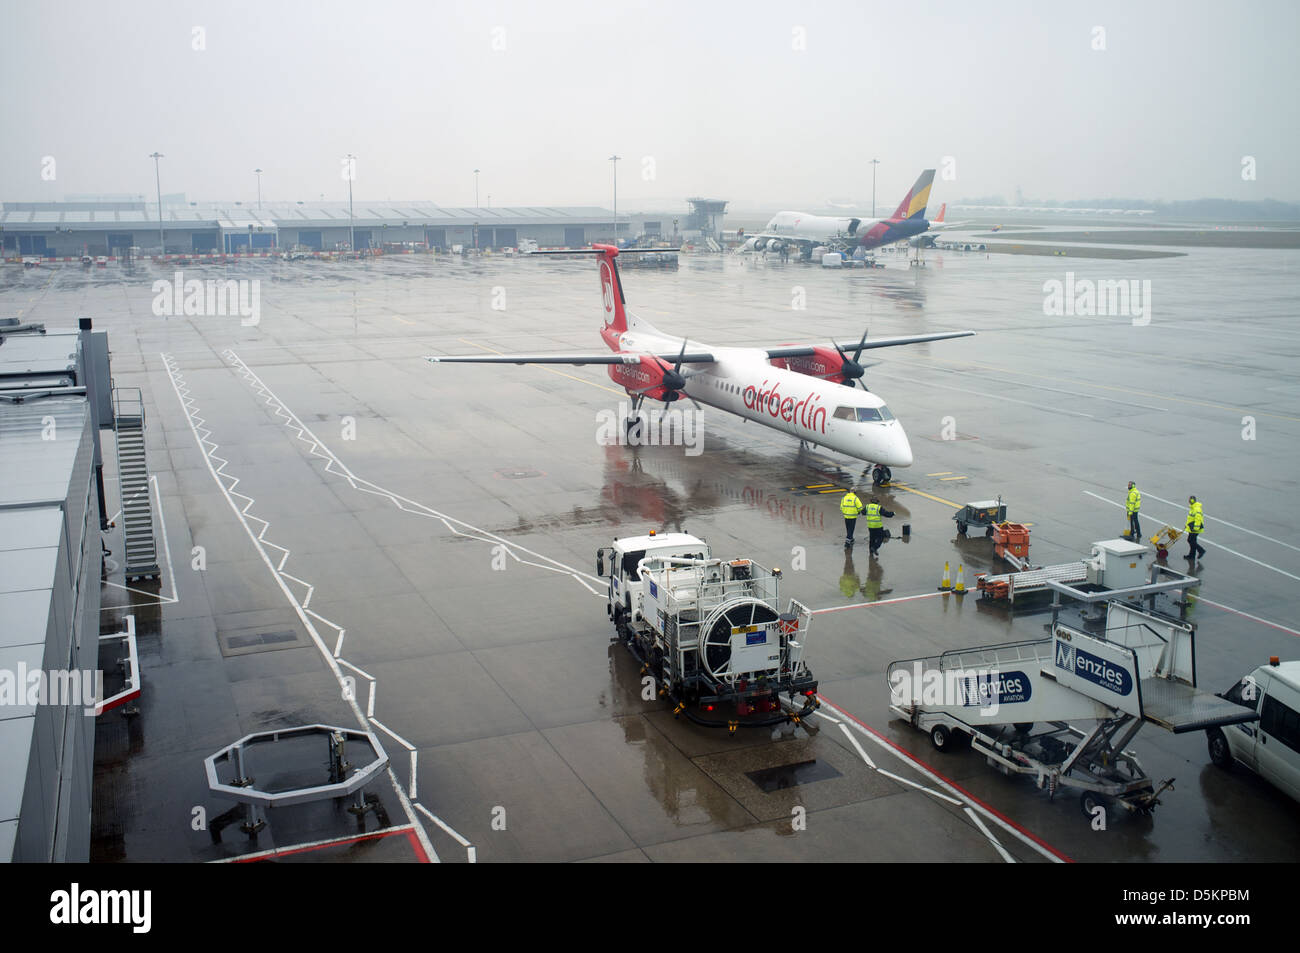 Ground staff await the arrival of an Air Berlin turbo-prop passenger aircraft, Stansted airport, Essex, UK. Stock Photo